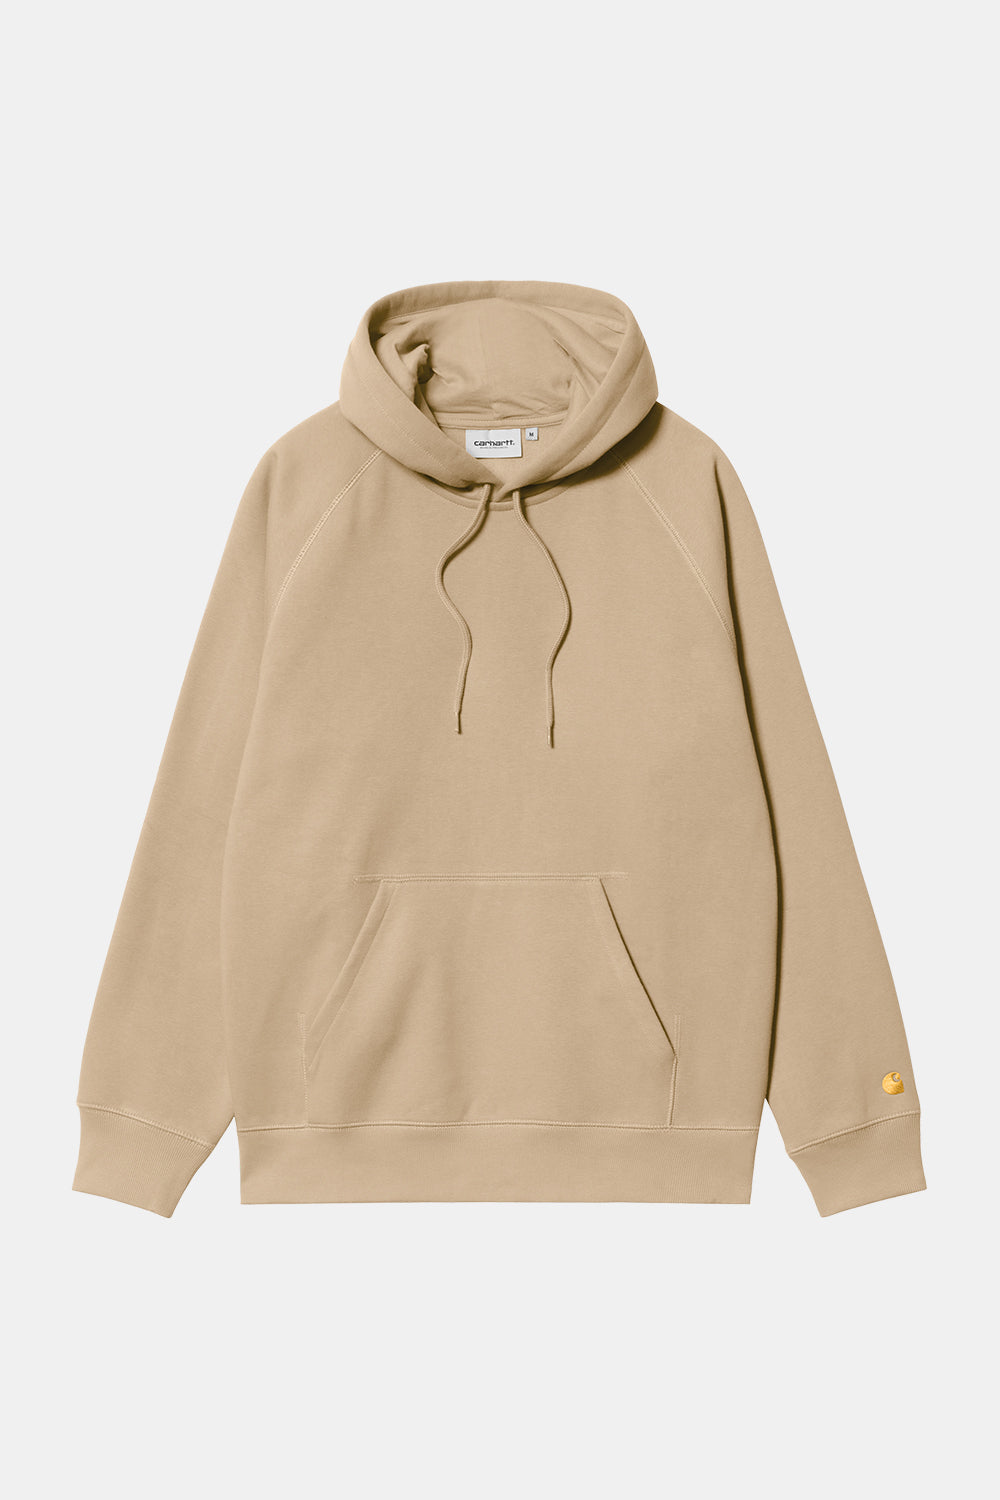 Carhartt WIP Hooded Chase Sweat (Sable/Gold)